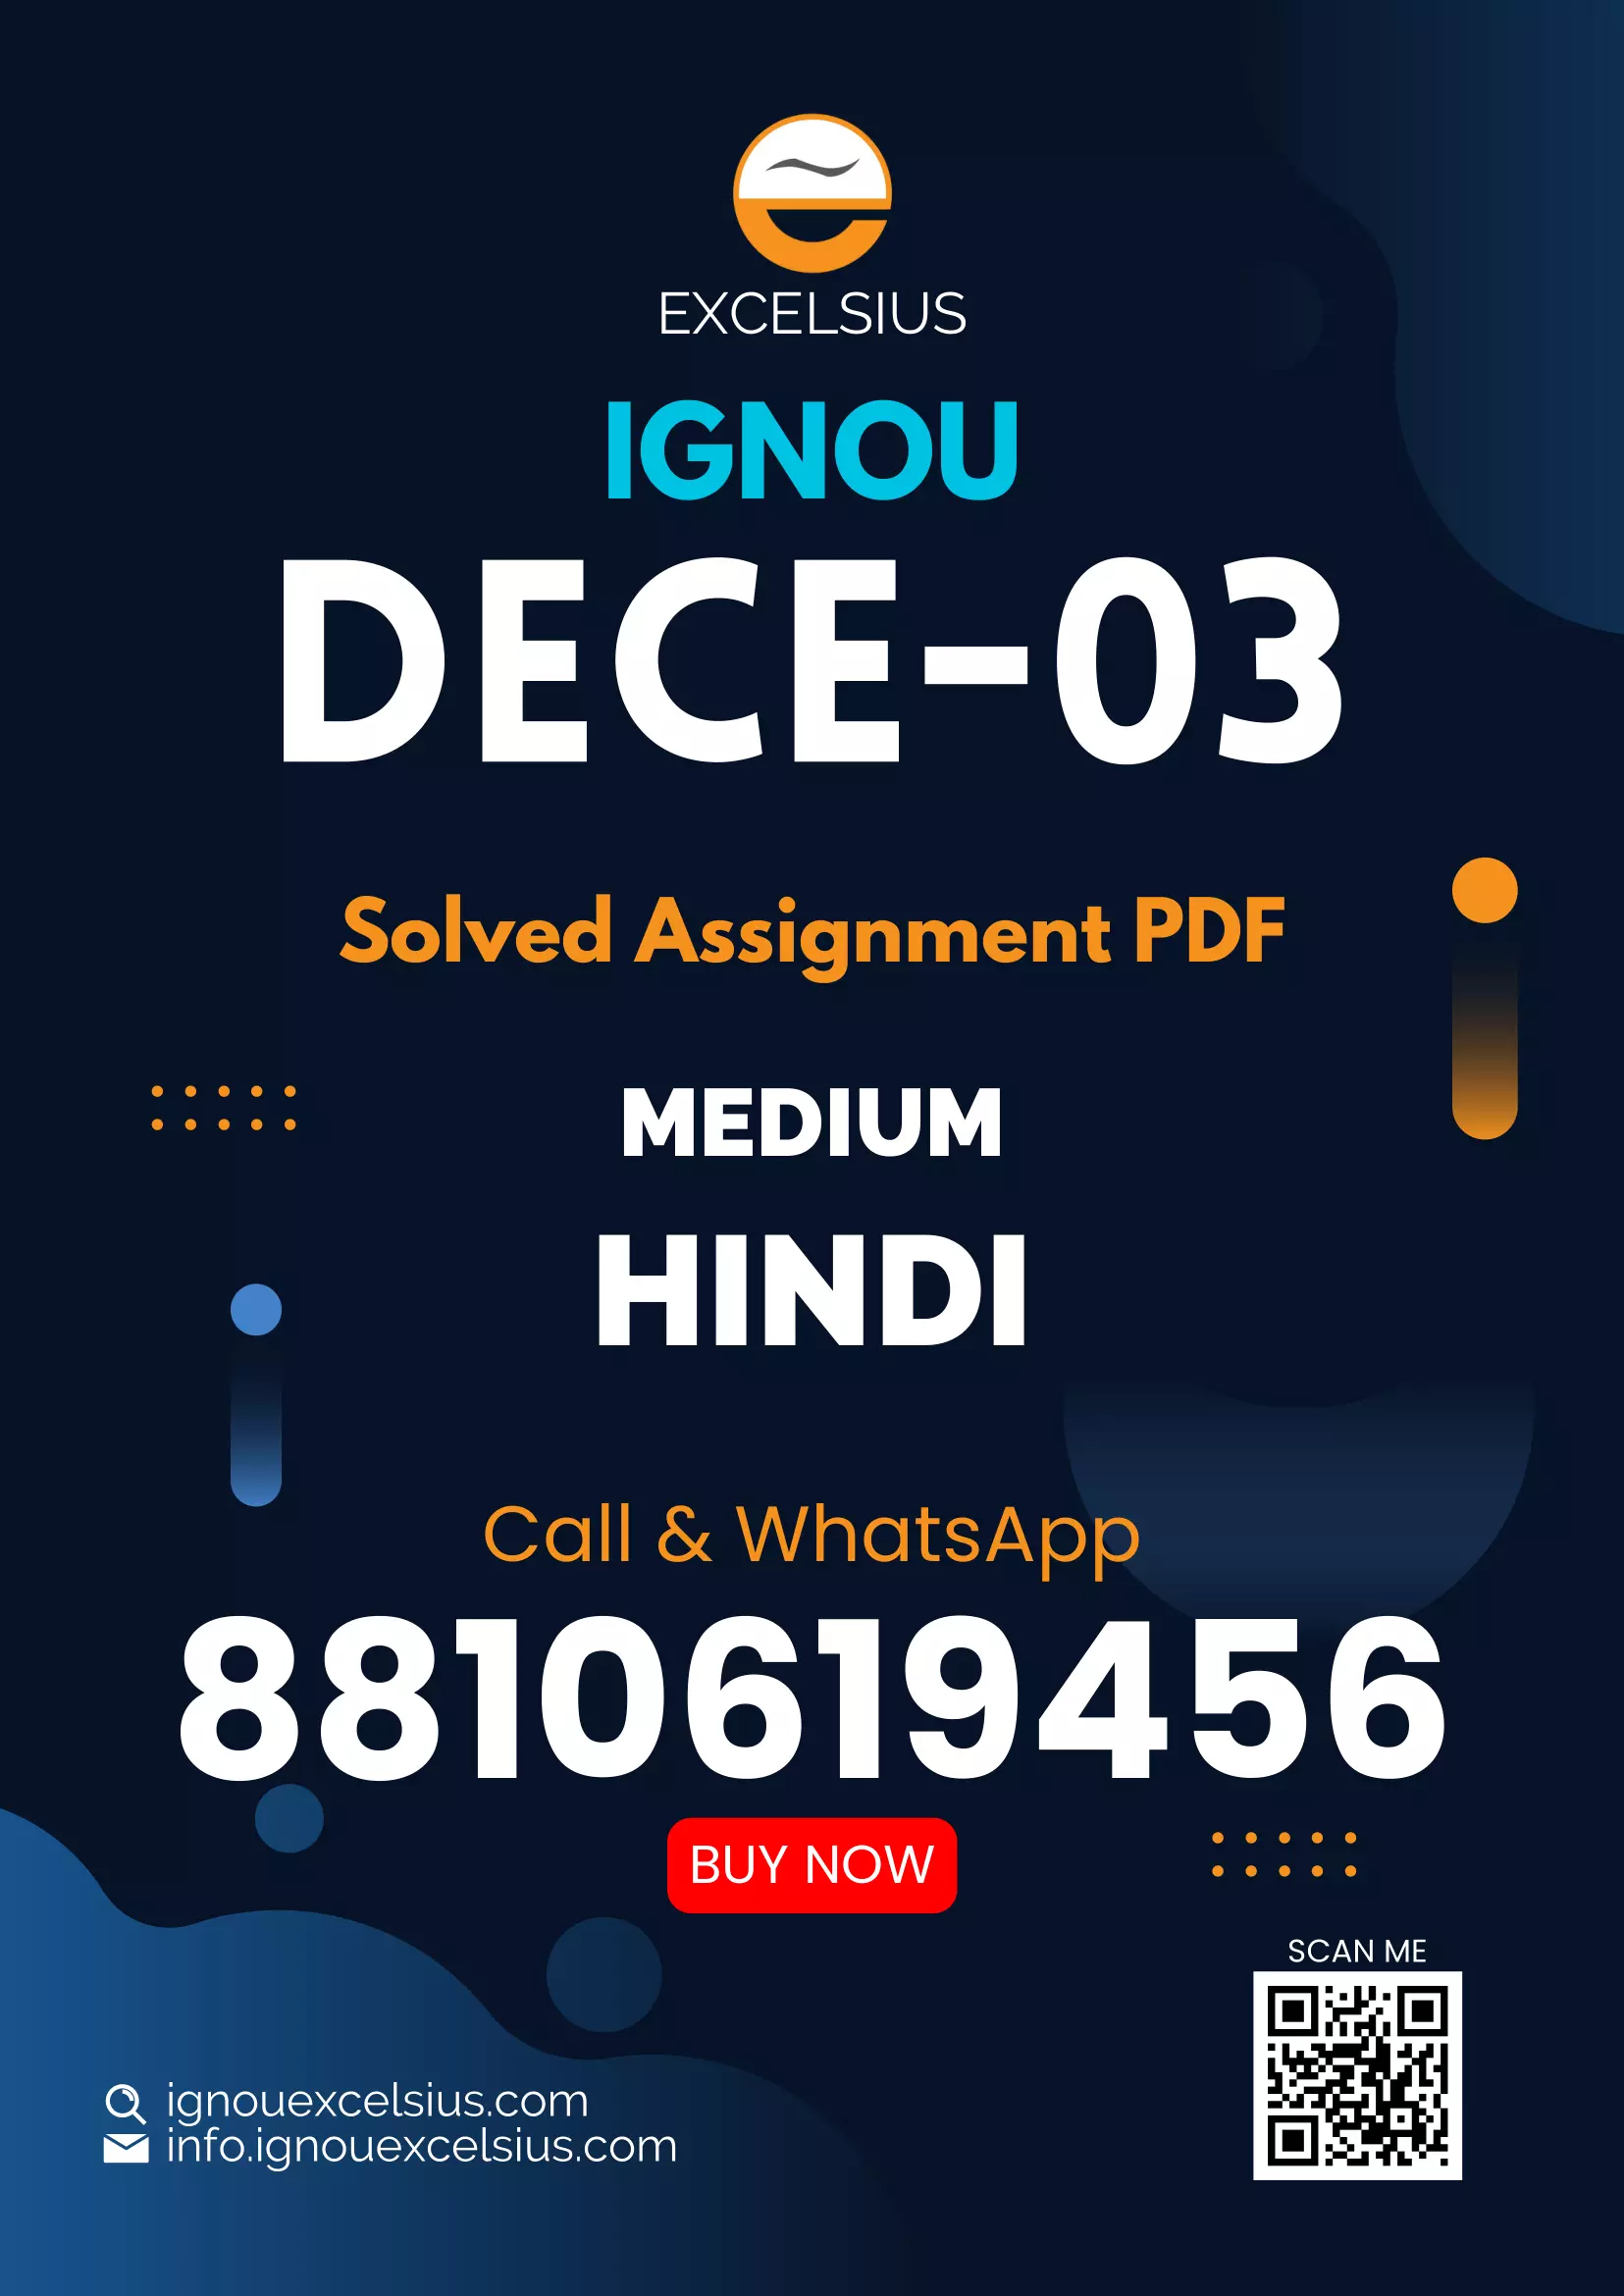 IGNOU DECE-03 - Services and Programmes for Children, Latest Solved Assignment-January 2023 - July 2023